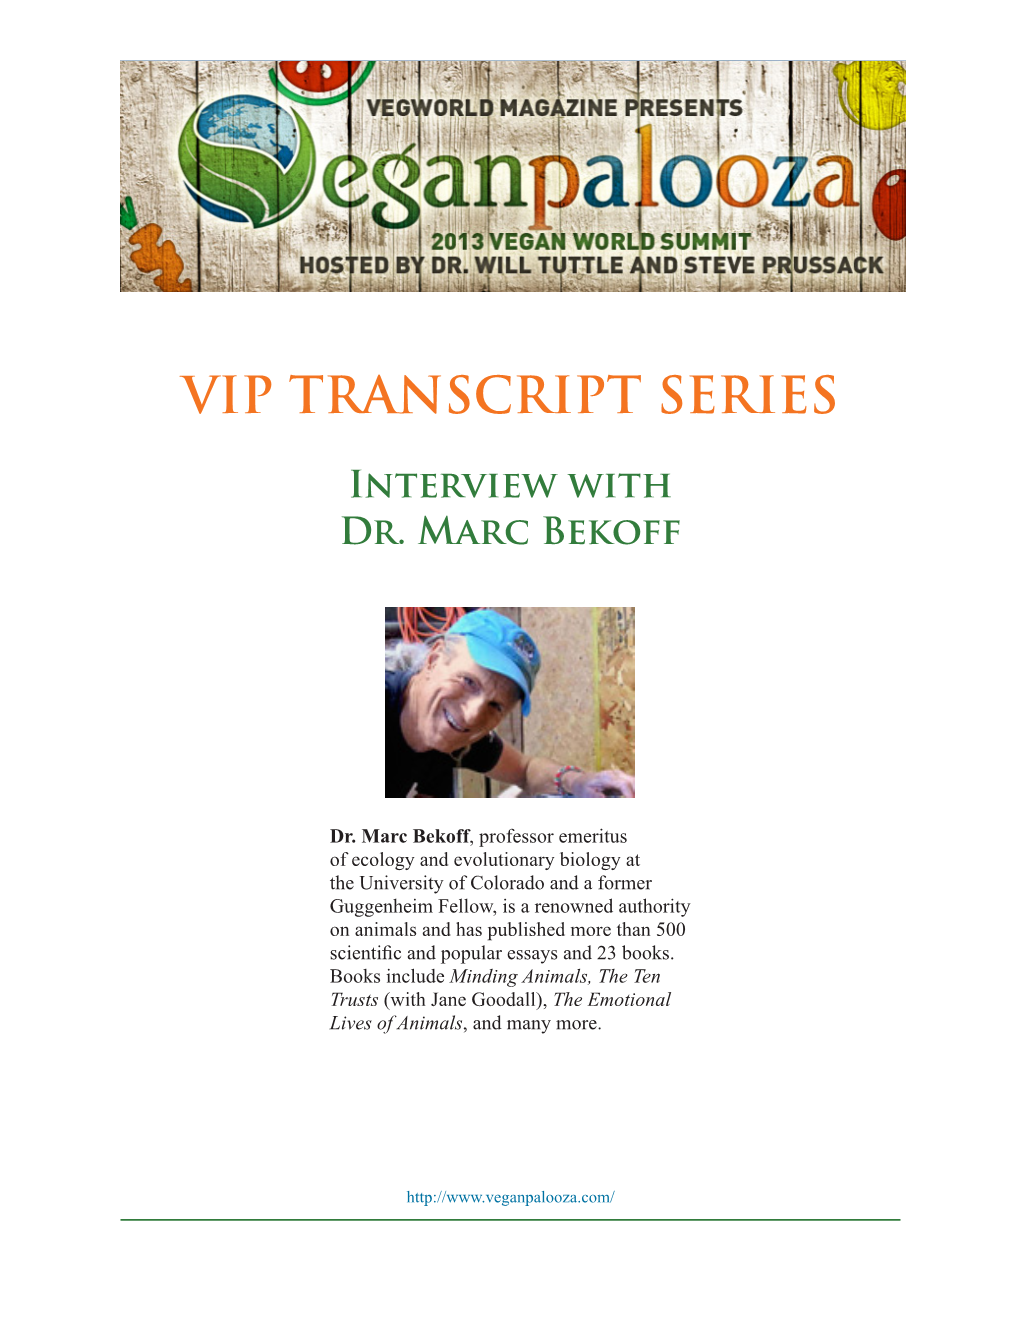 VIP TRANSCRIPT SERIES Interview with Dr. Marc Bekoff